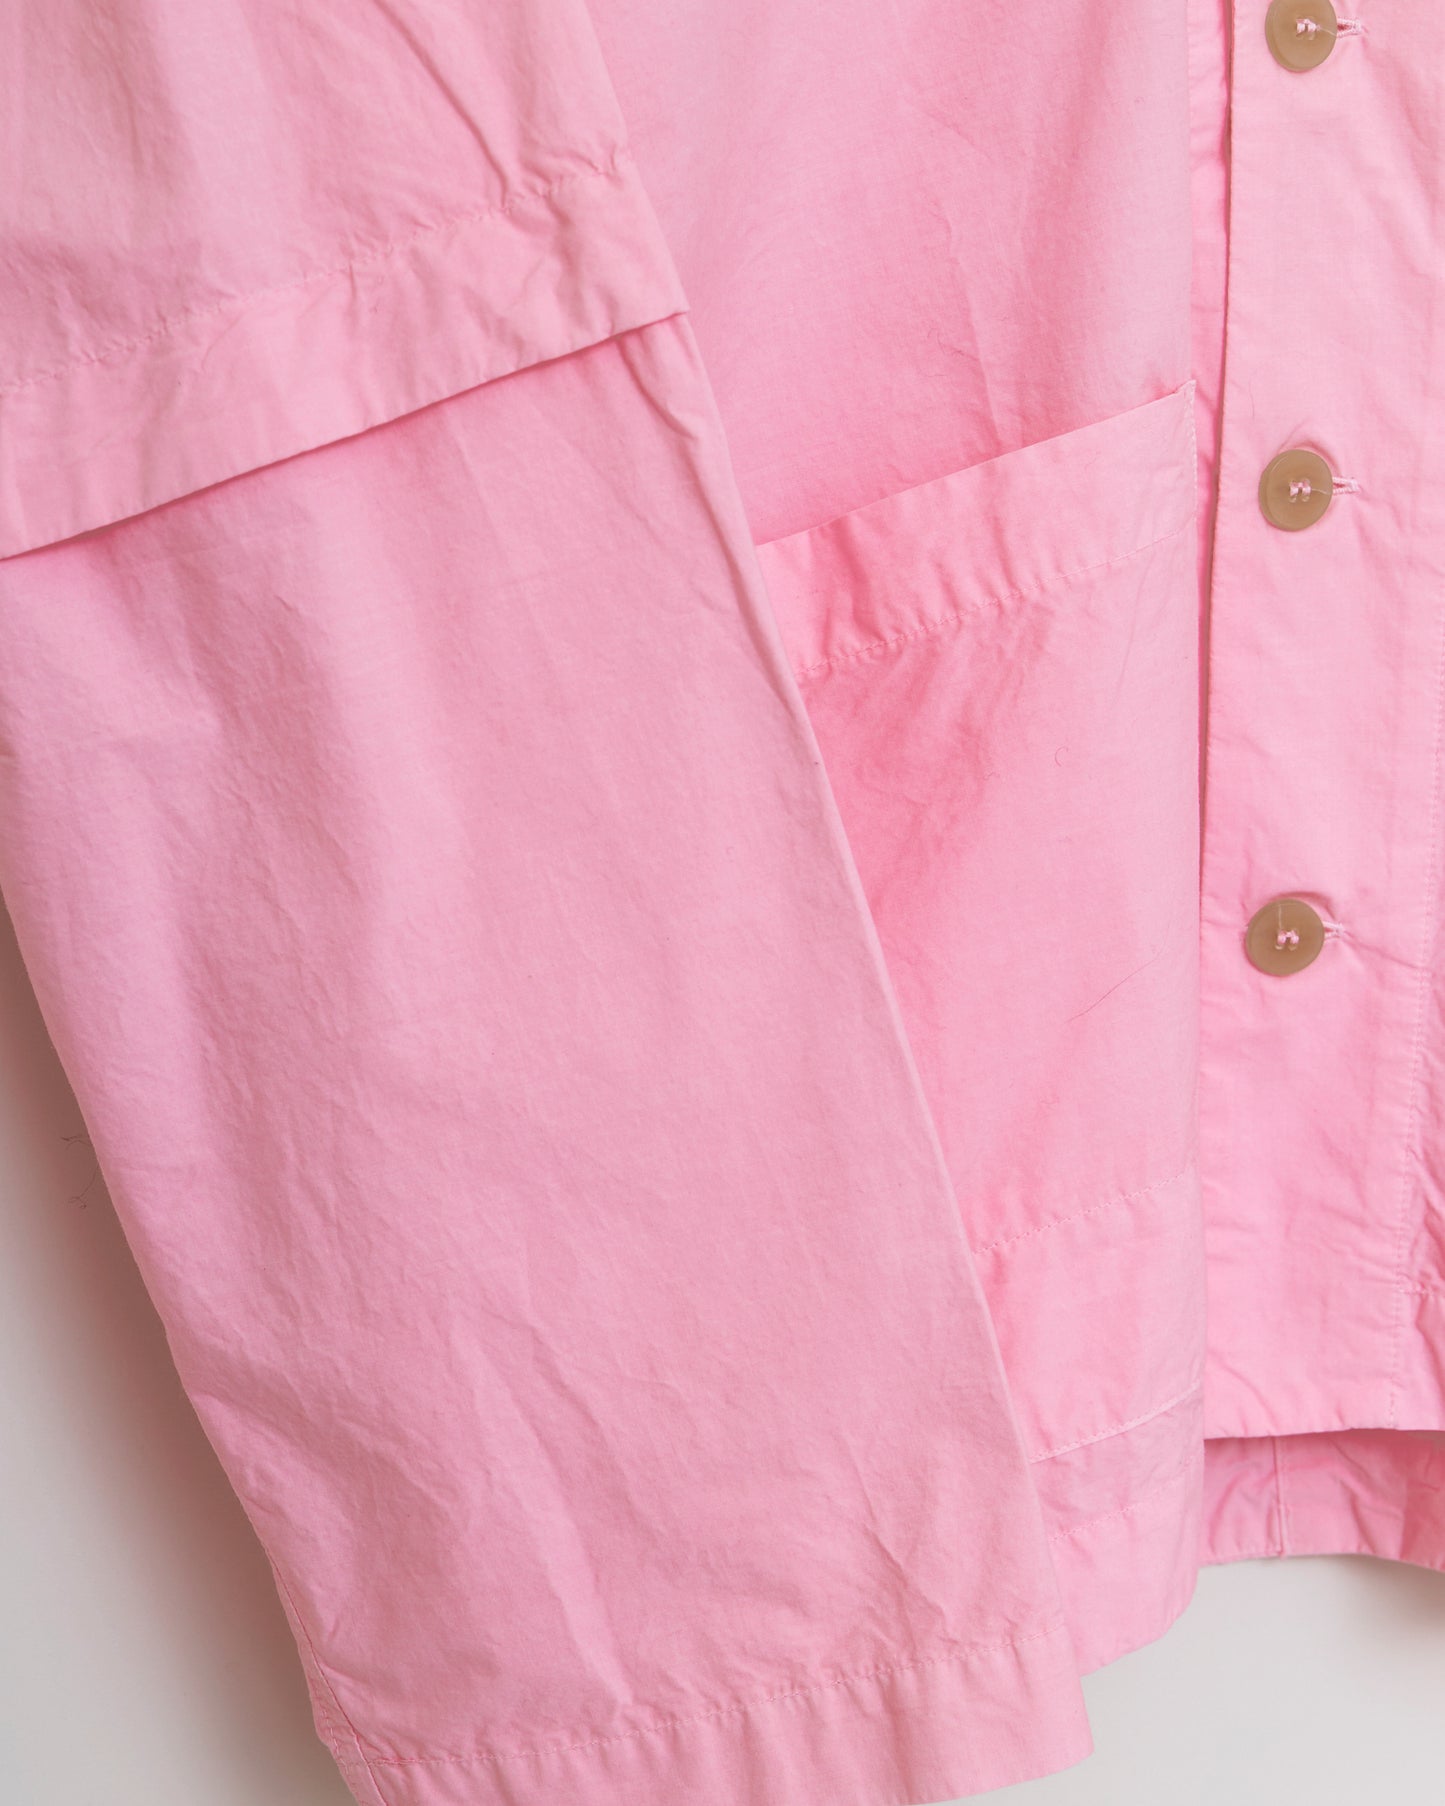 Long Sleeve Camp Collar Shirt in Paper Compact Cotton - Rose